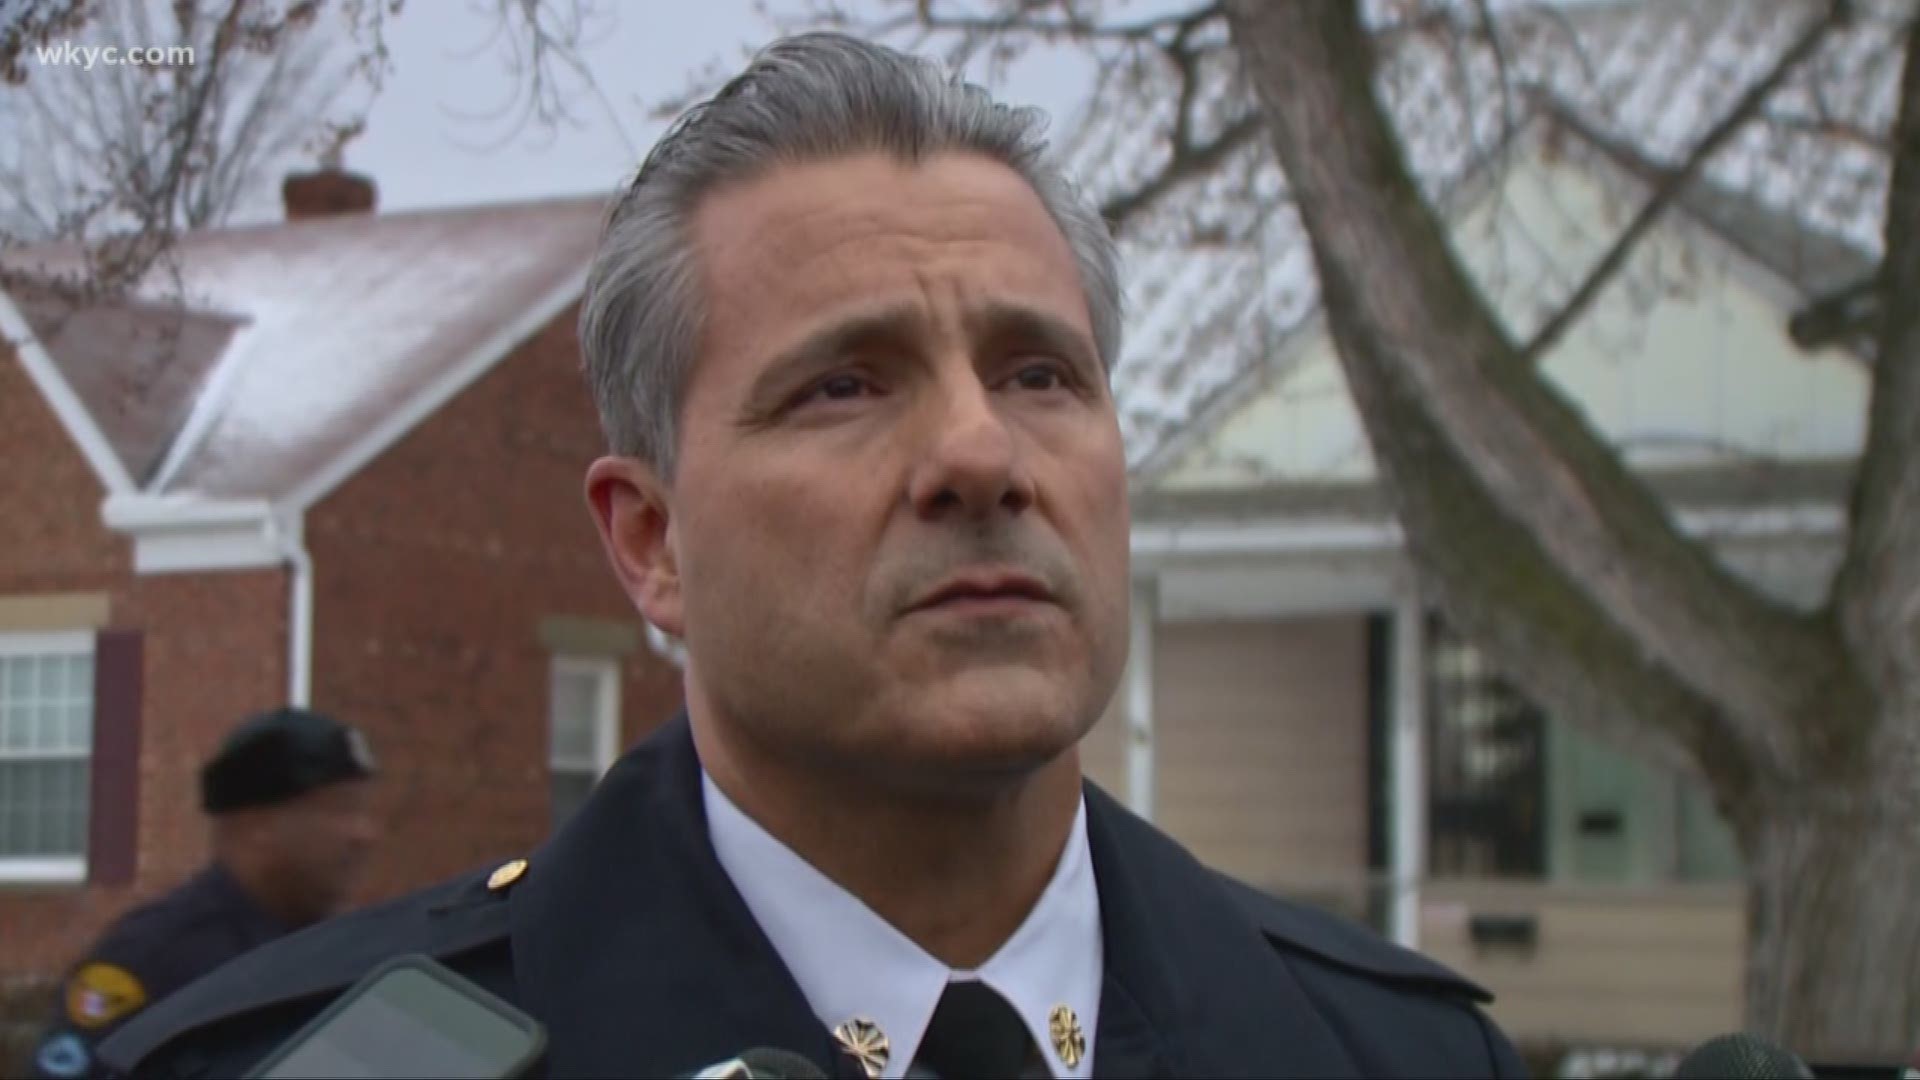 Cleveland firefighters filed a written demand today to the city of Cleveland demanding that Fire Chief Angelo Calvillo be immediately removed from office and charged with multiple criminal acts.